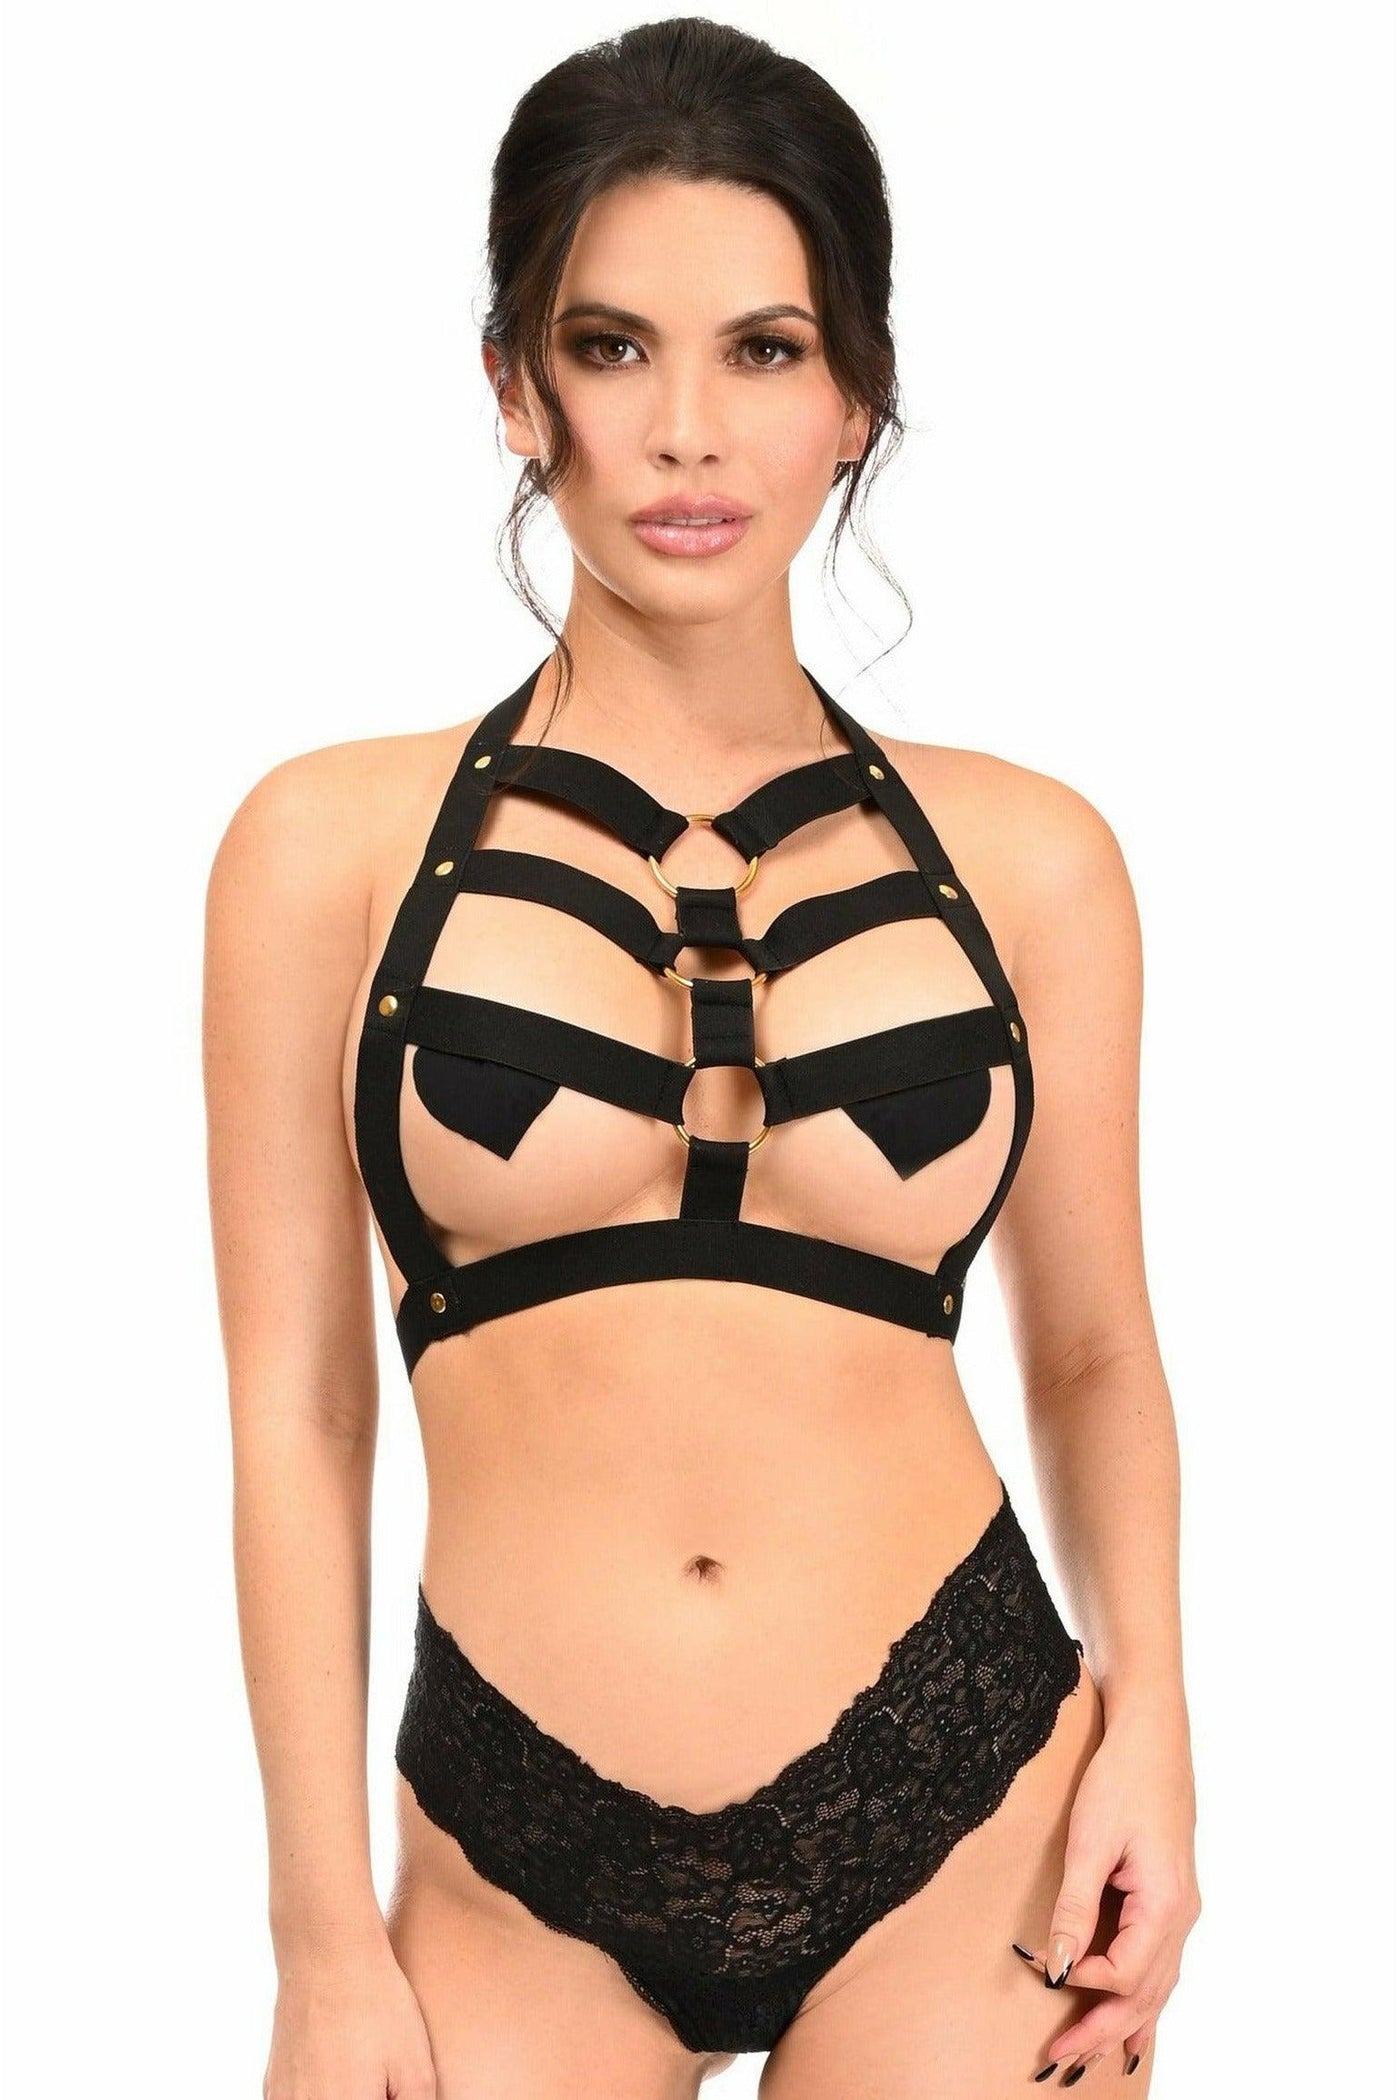 Black Stretchy Body Harness w/Gold Hardware - Daisy Corsets